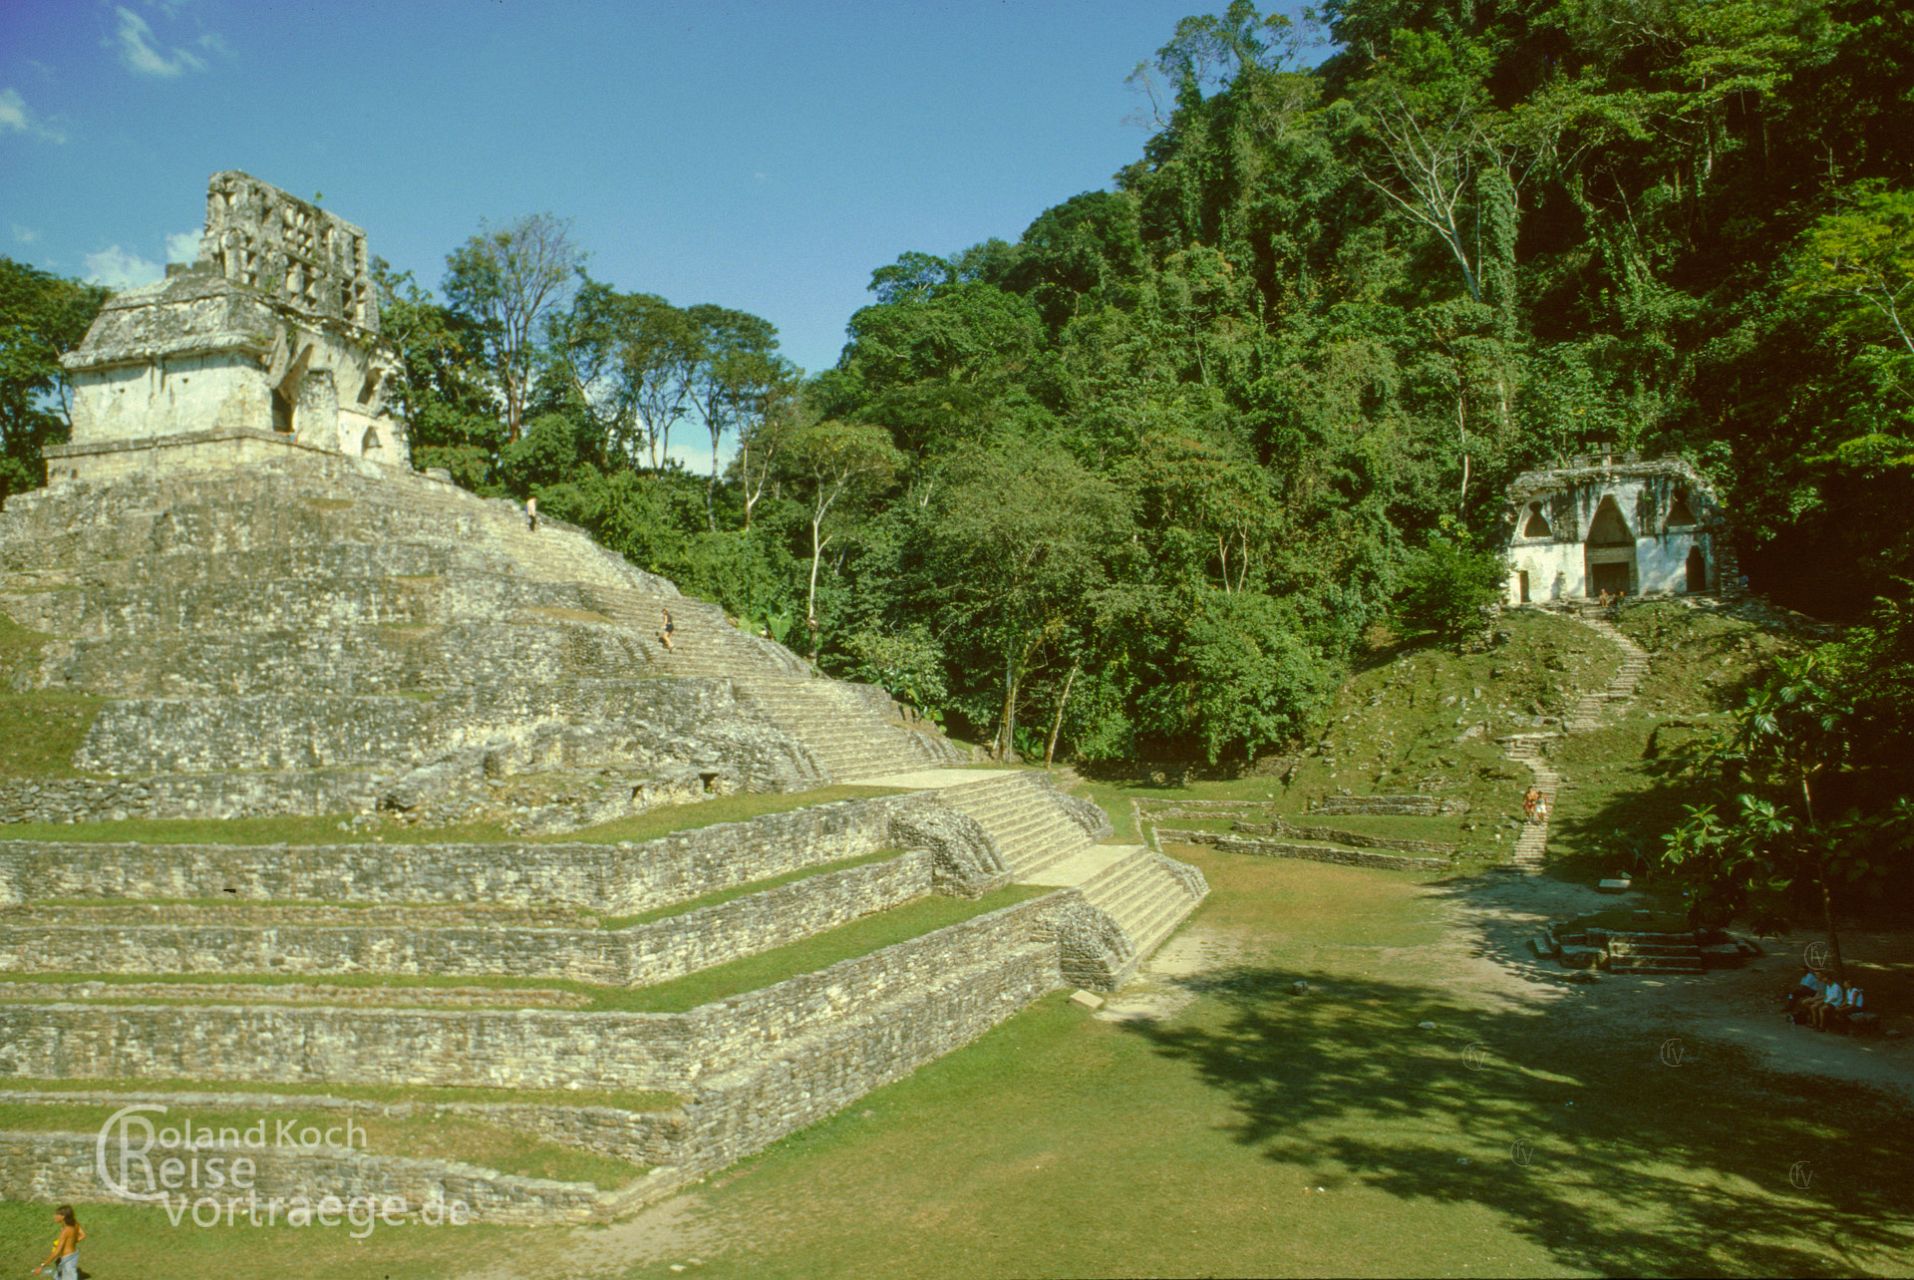 Mexico - Palenque - UNESCO World Heritage Ruins of the Mayan city